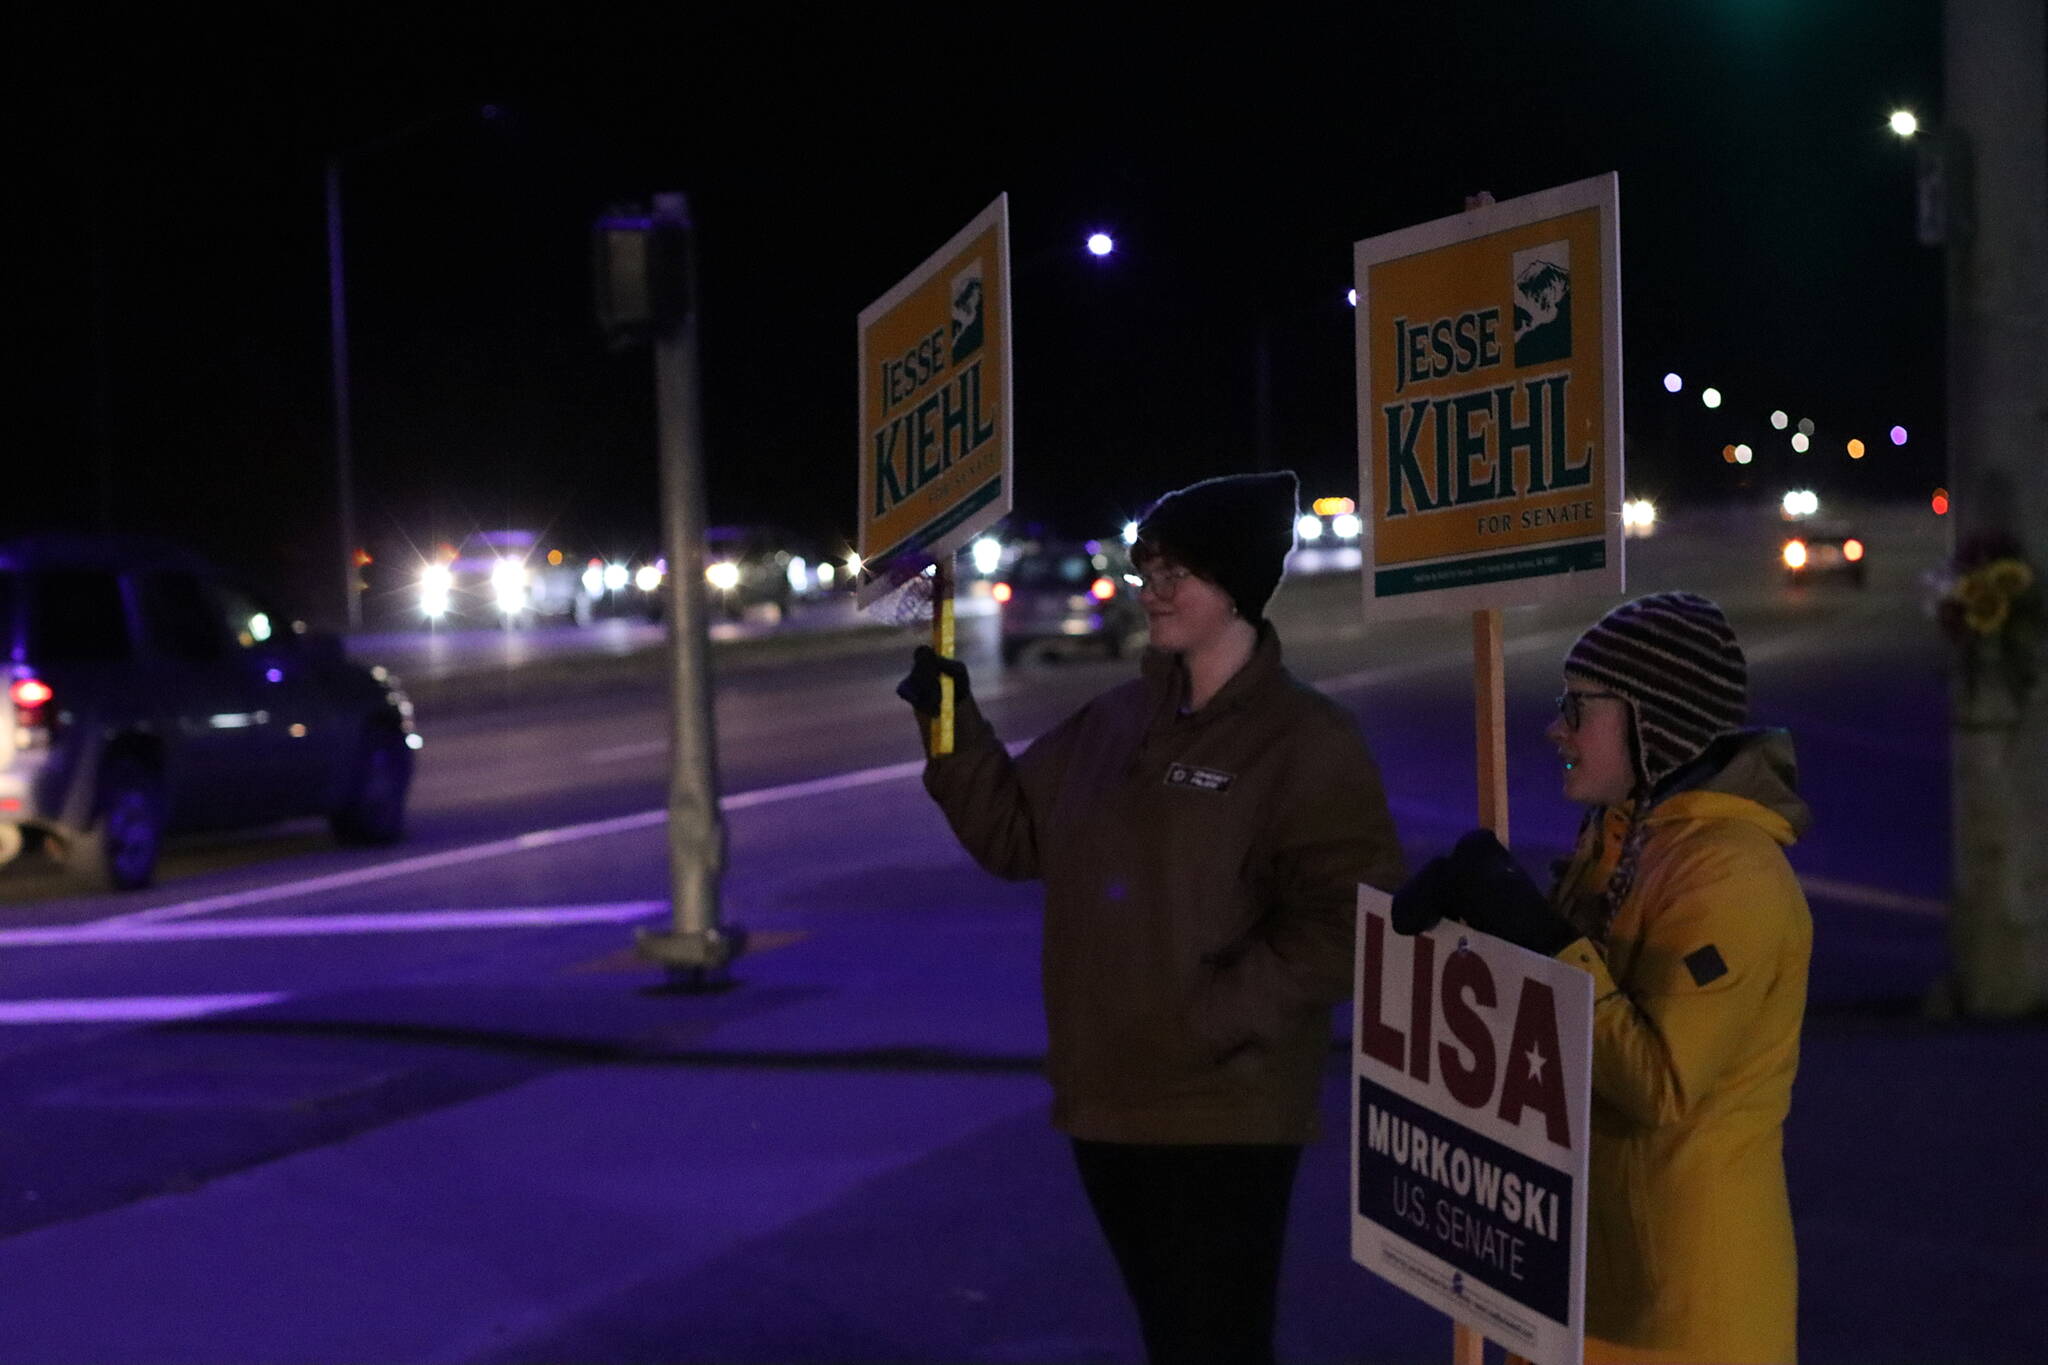 Ella Adkinson, left, and Cathy Schlingheyde are the lone campaign sign wavers during the evening rush hour at the McNugget Intersection, one of two major locations sign wavers typically gather locally. State Sen. Jesse Kiehl of Juneau, who coordinated some of the activity during the day, said nearly 20 people representing a variety of candidates gathered at the other intersection at Egan Drive and 12th Street at about 5 p.m. By 6 p.m. all of them were gone from the downtown intersection. (Mark Sabbatini / Juneau Empire)